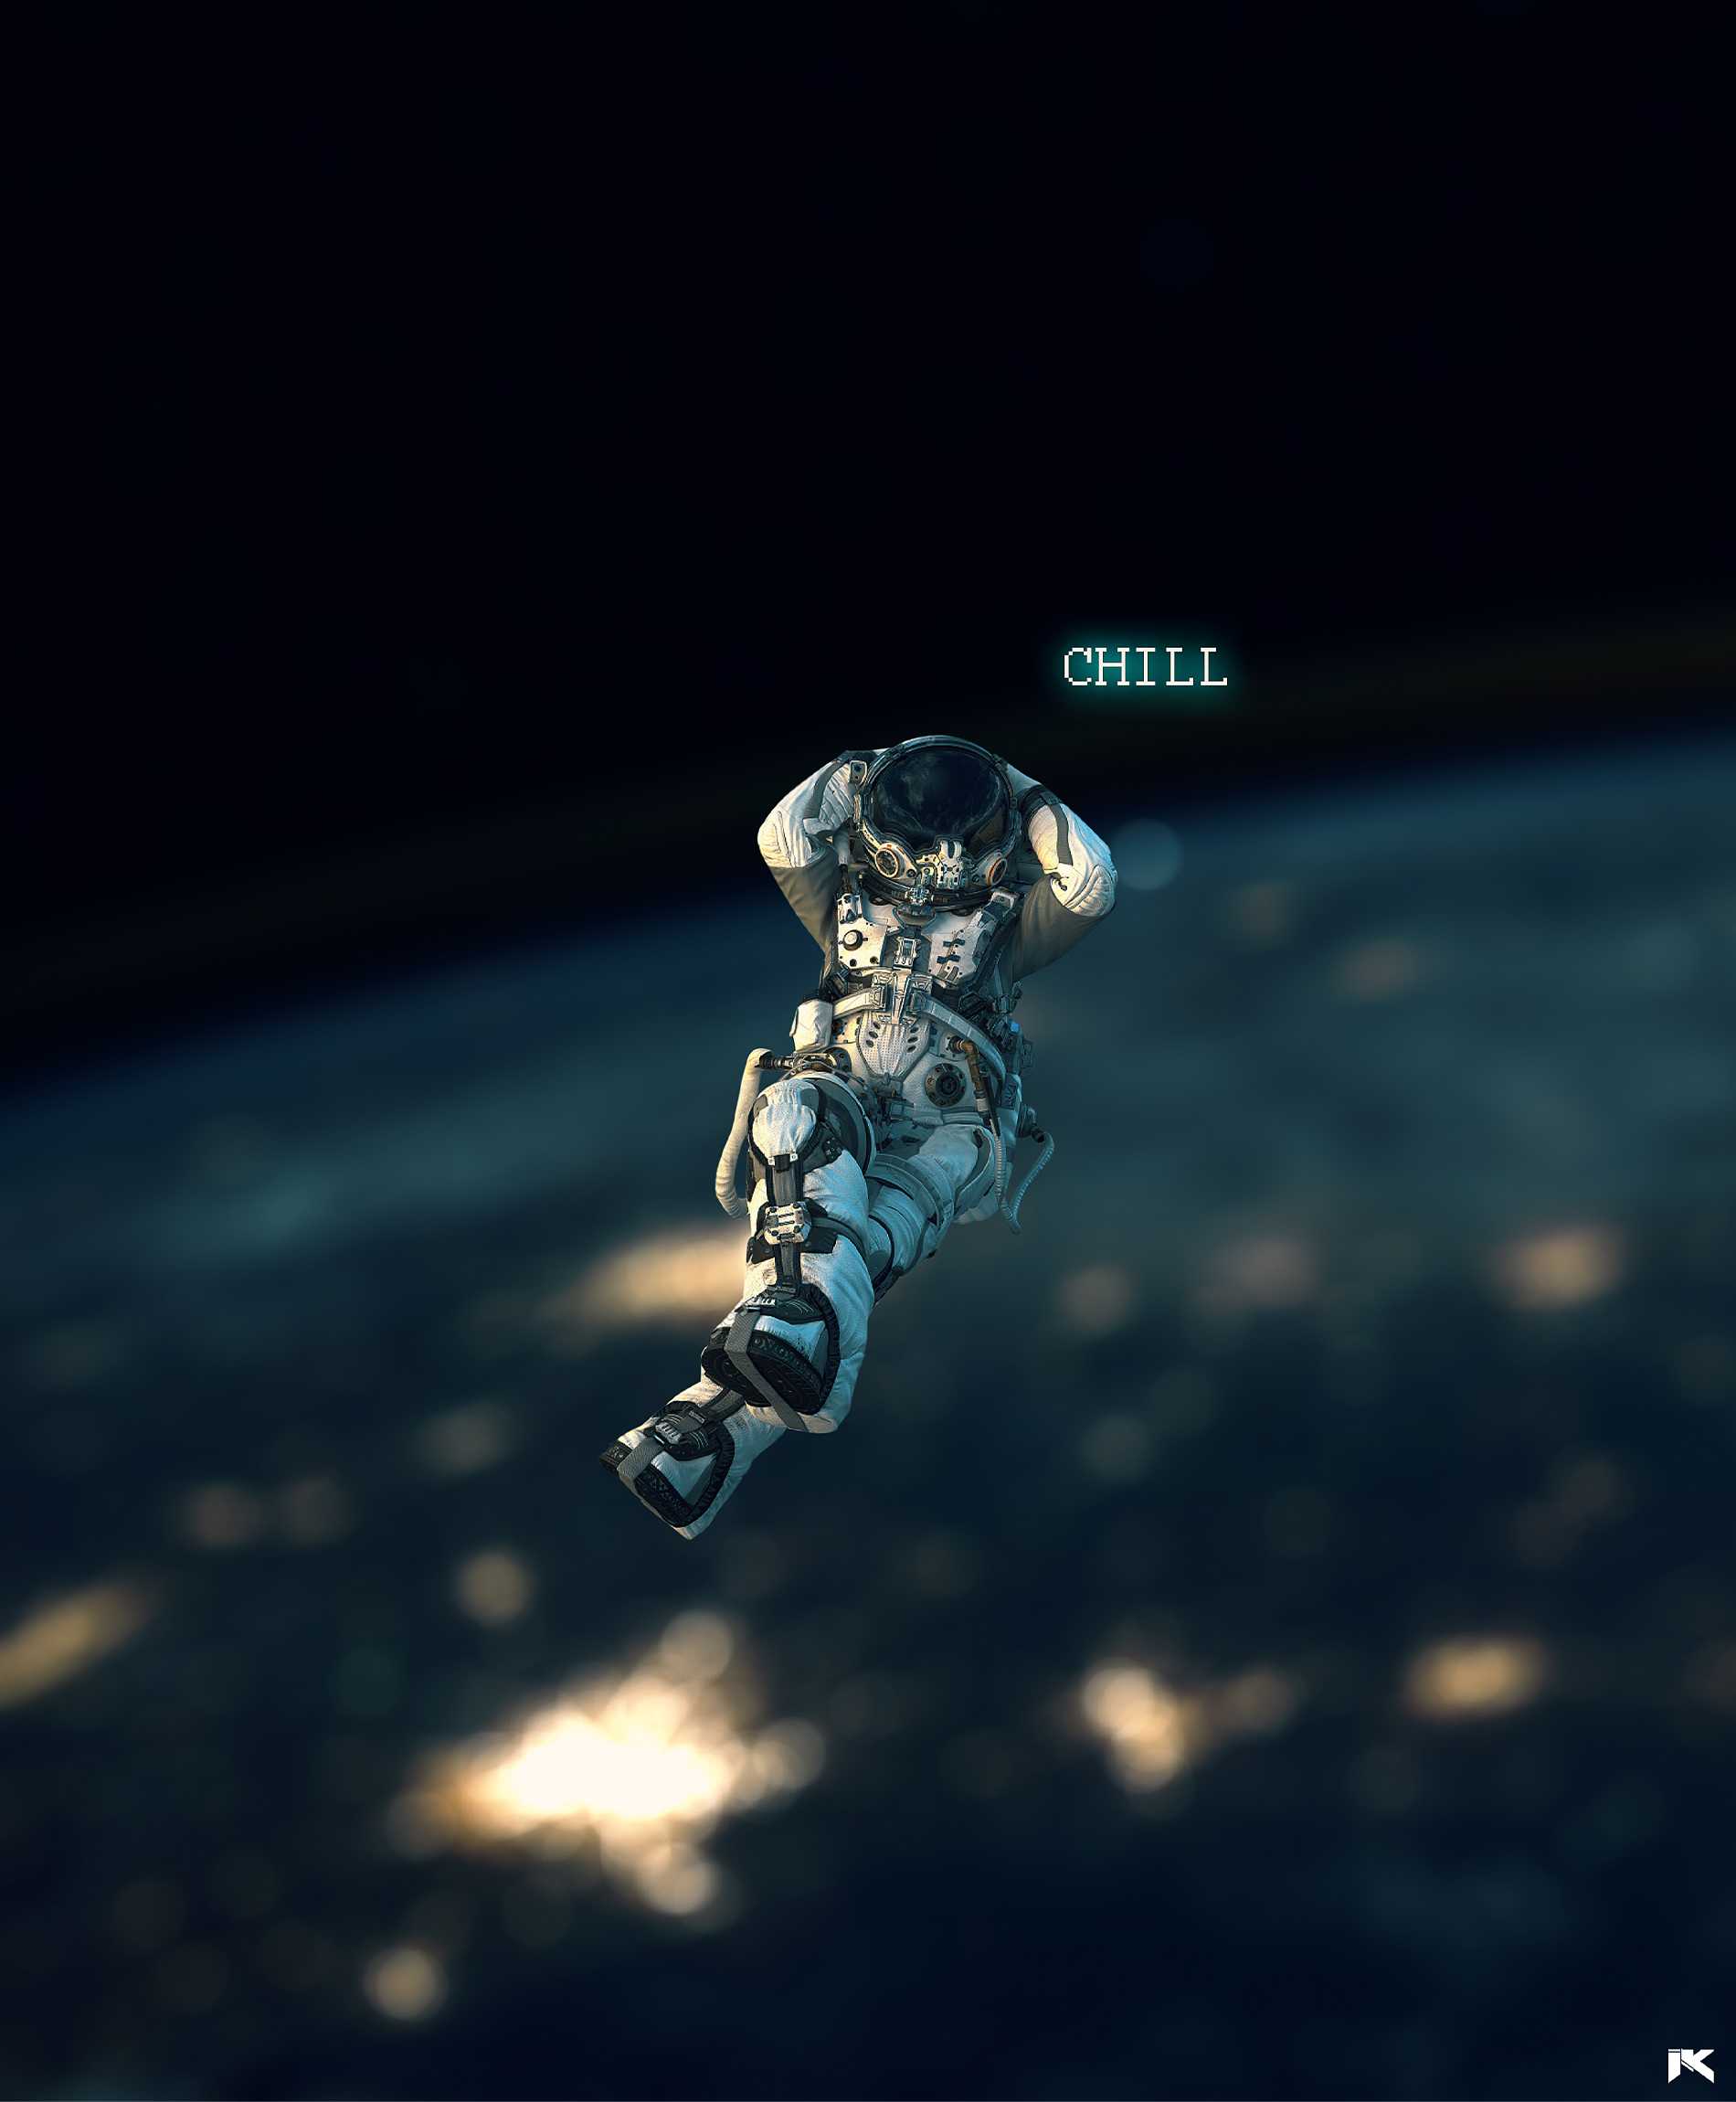 Chill in space